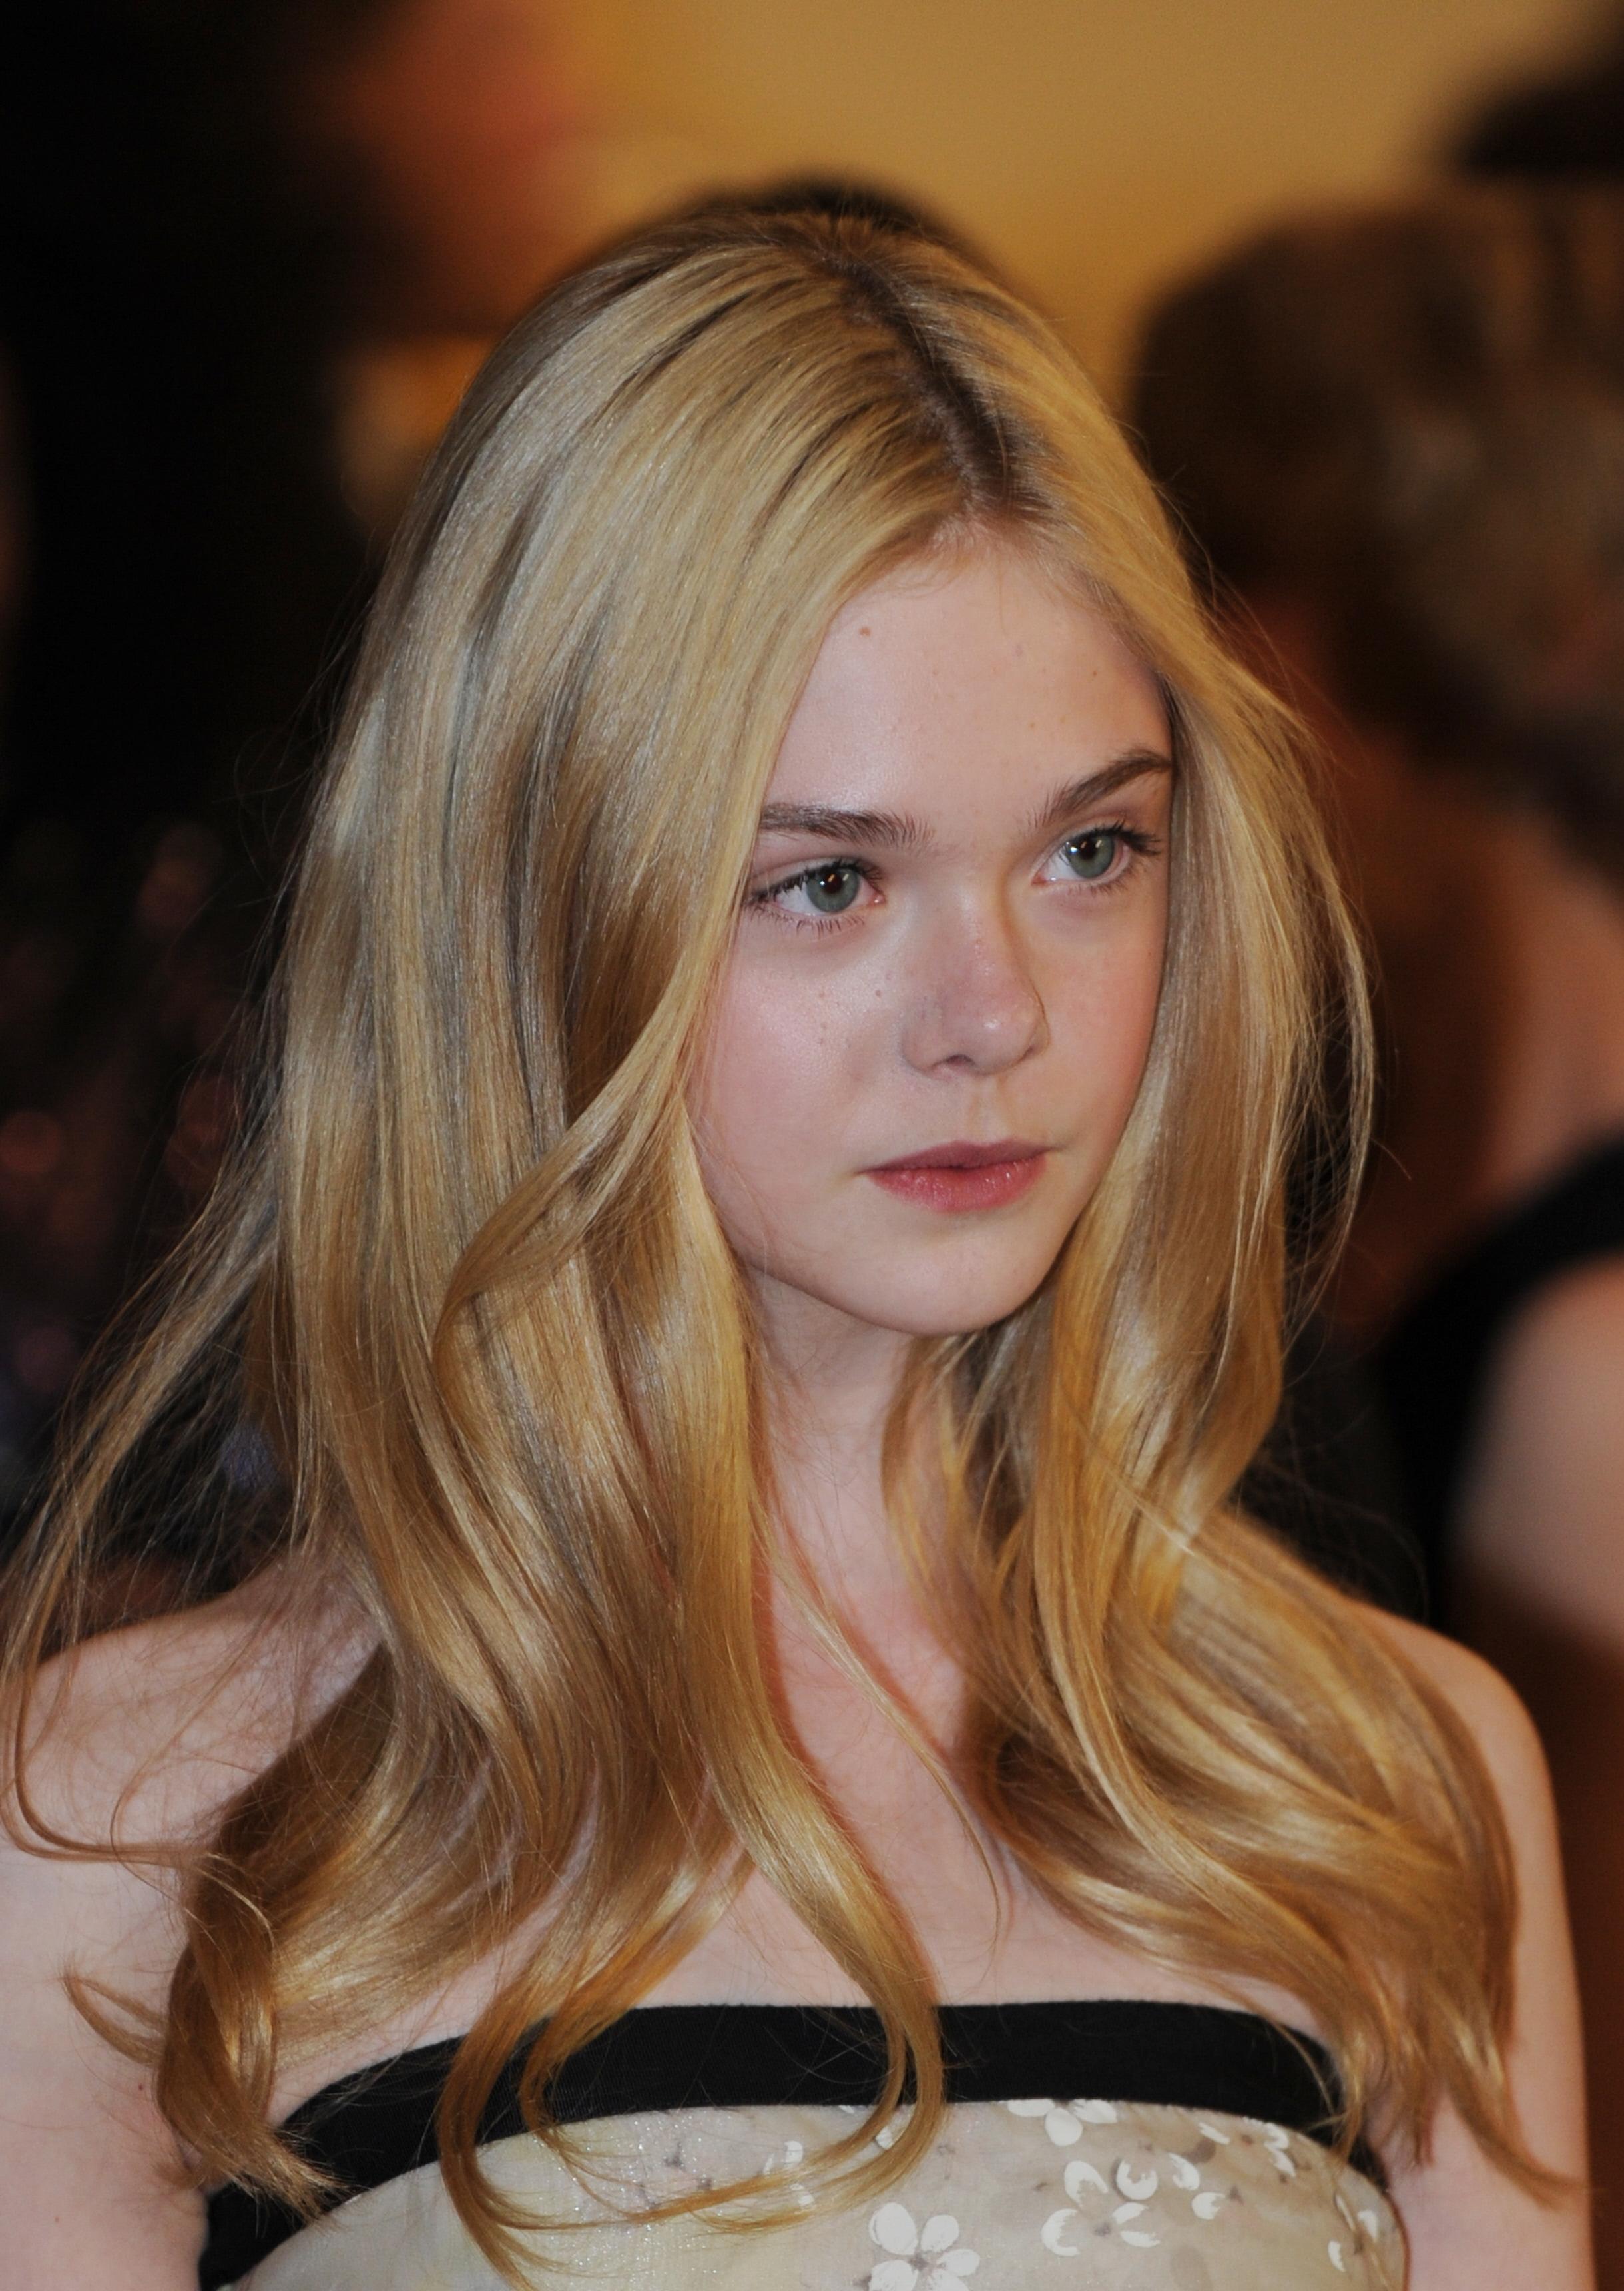 elle-fanning-photo-56-of-557-pics-wallpaper-photo-316808-theplace2